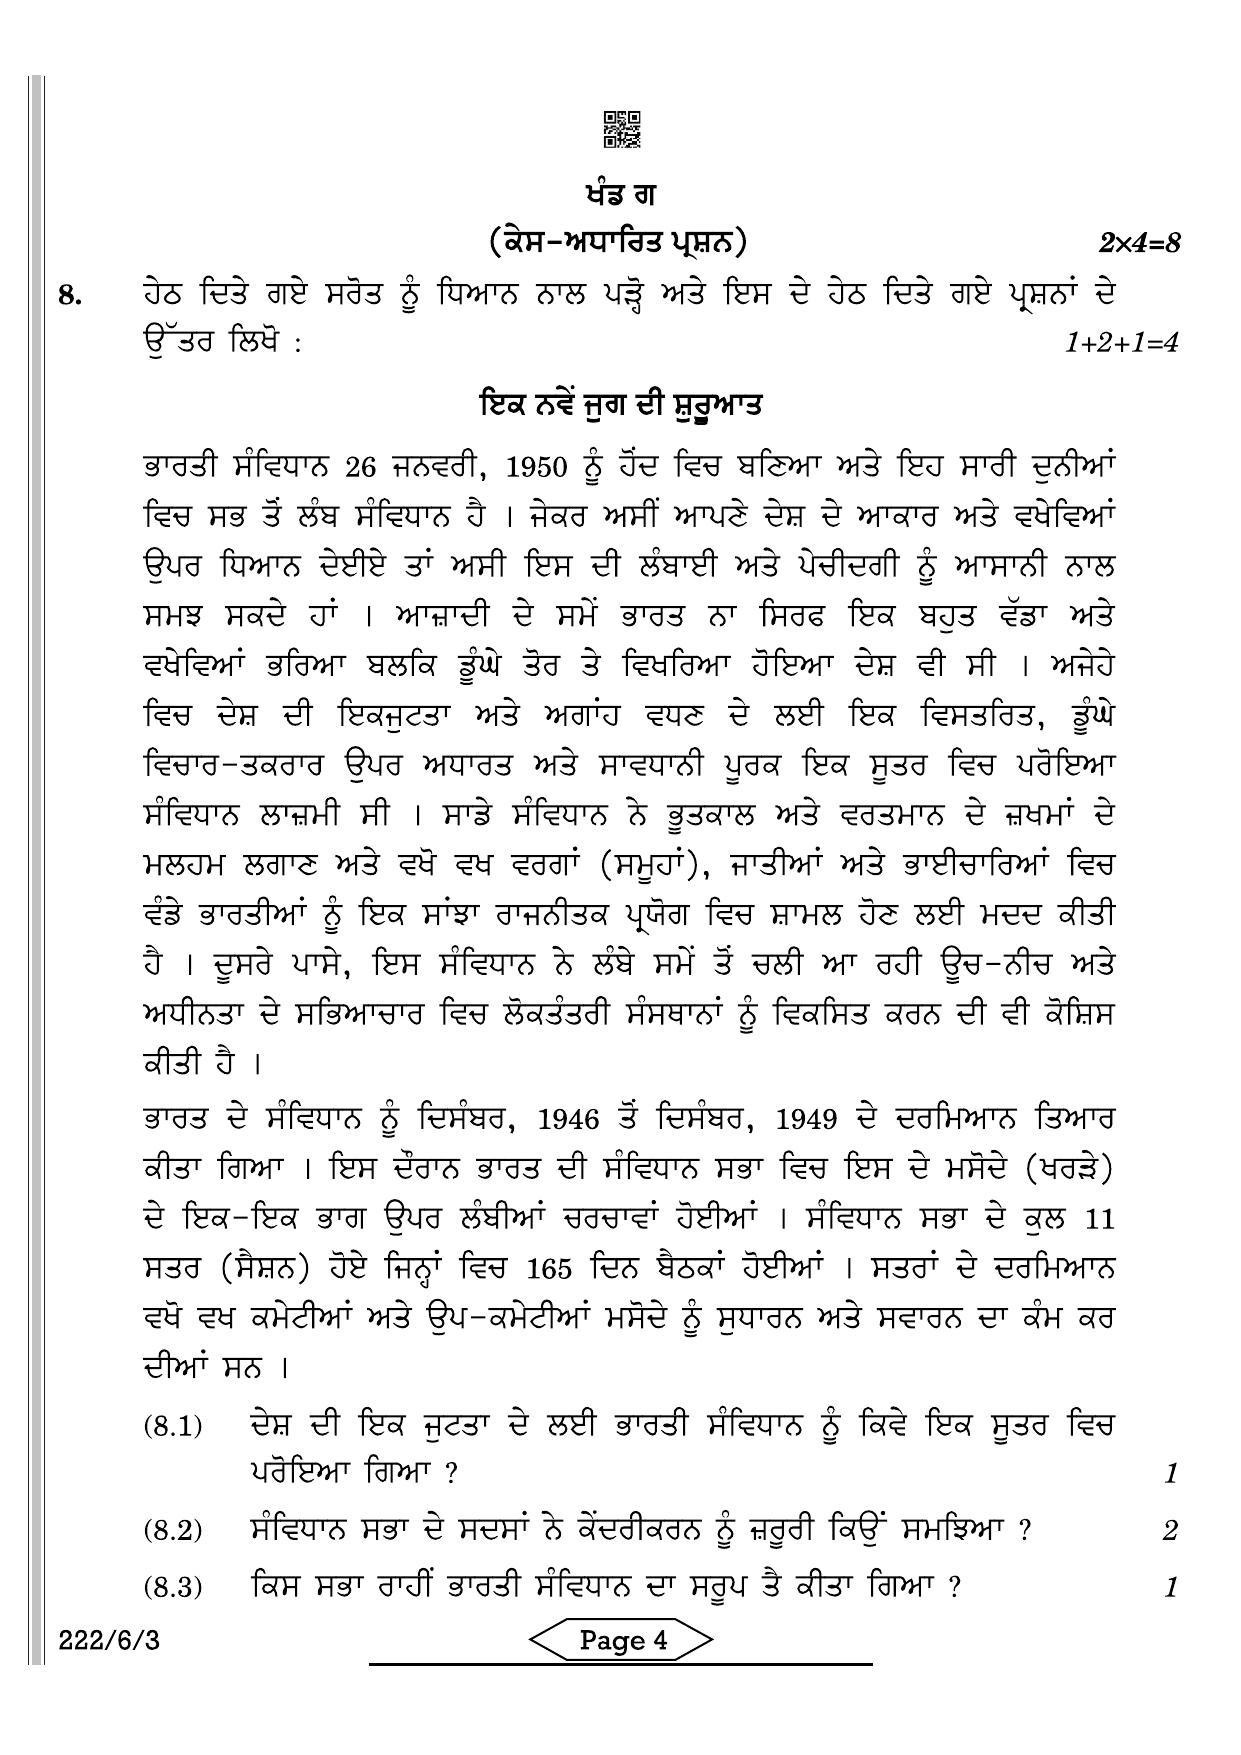 CBSE Class 12 222-6-3 History Punjabi 2022 Compartment Question Paper - Page 4